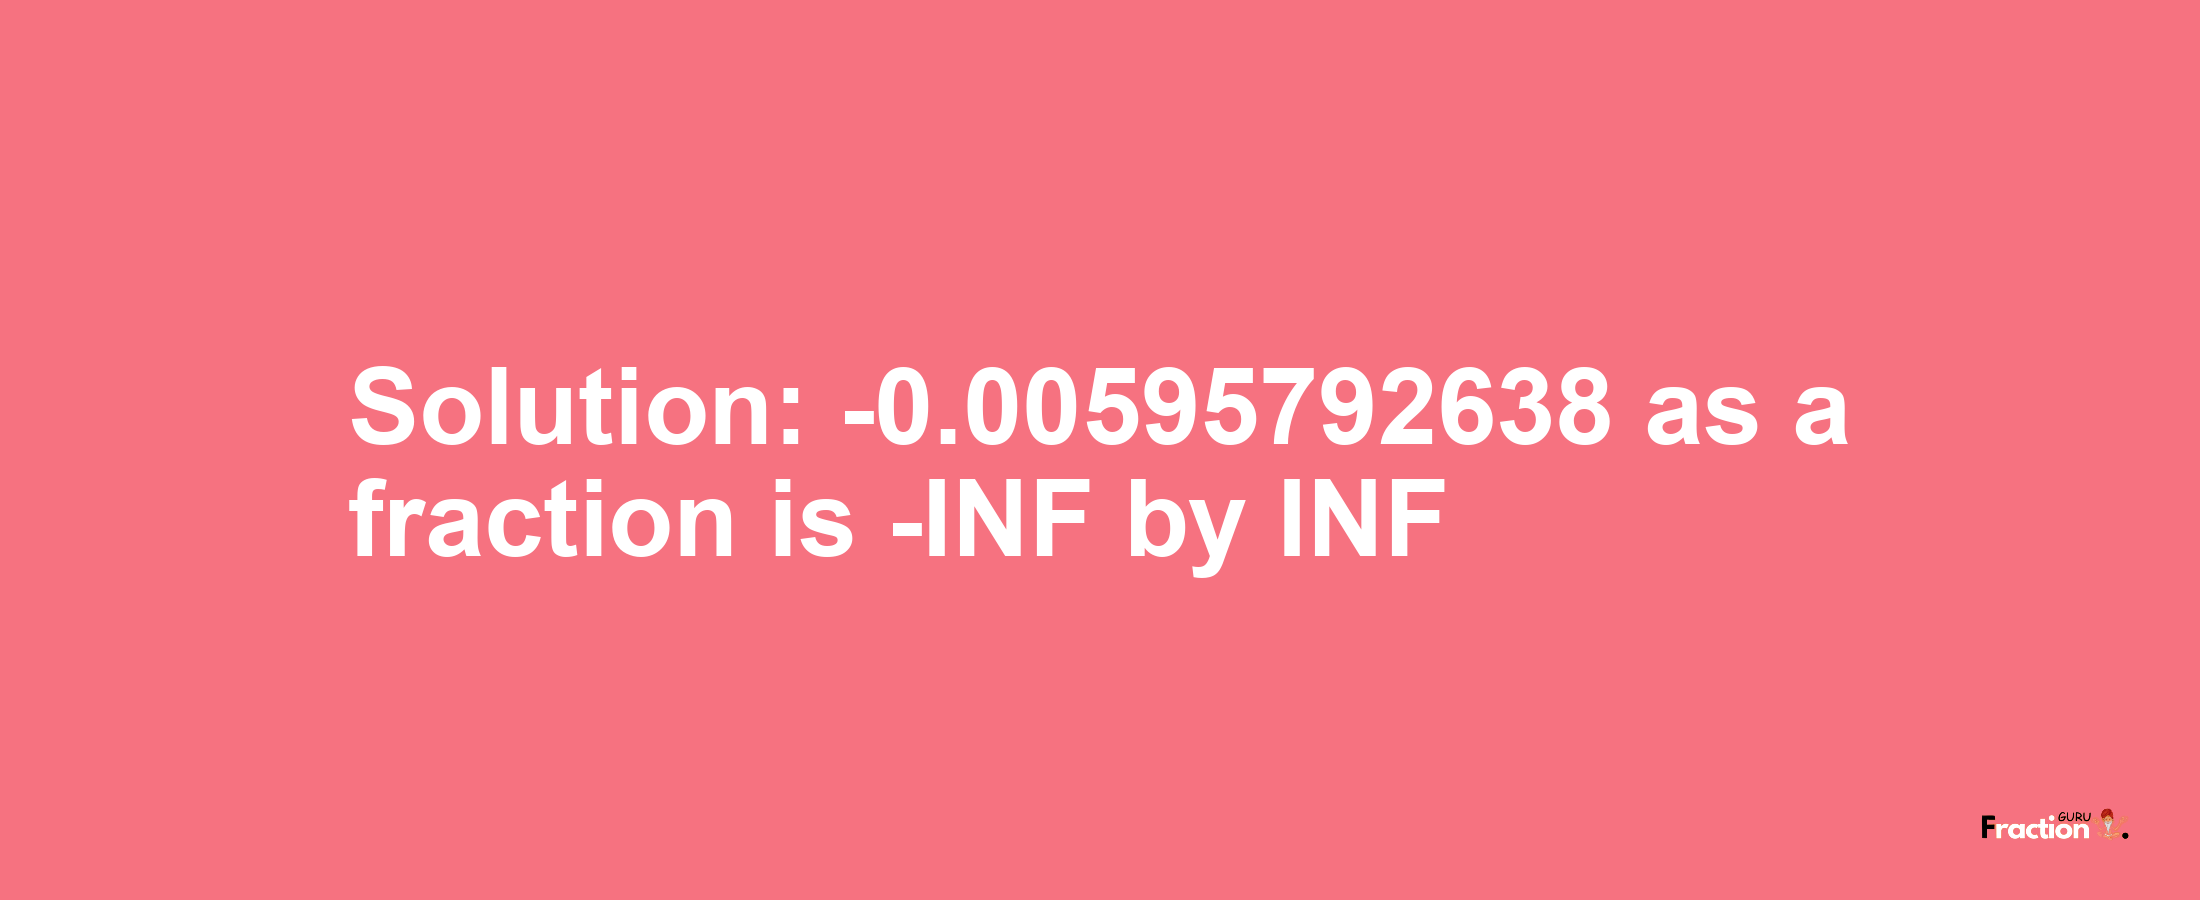 Solution:-0.00595792638 as a fraction is -INF/INF